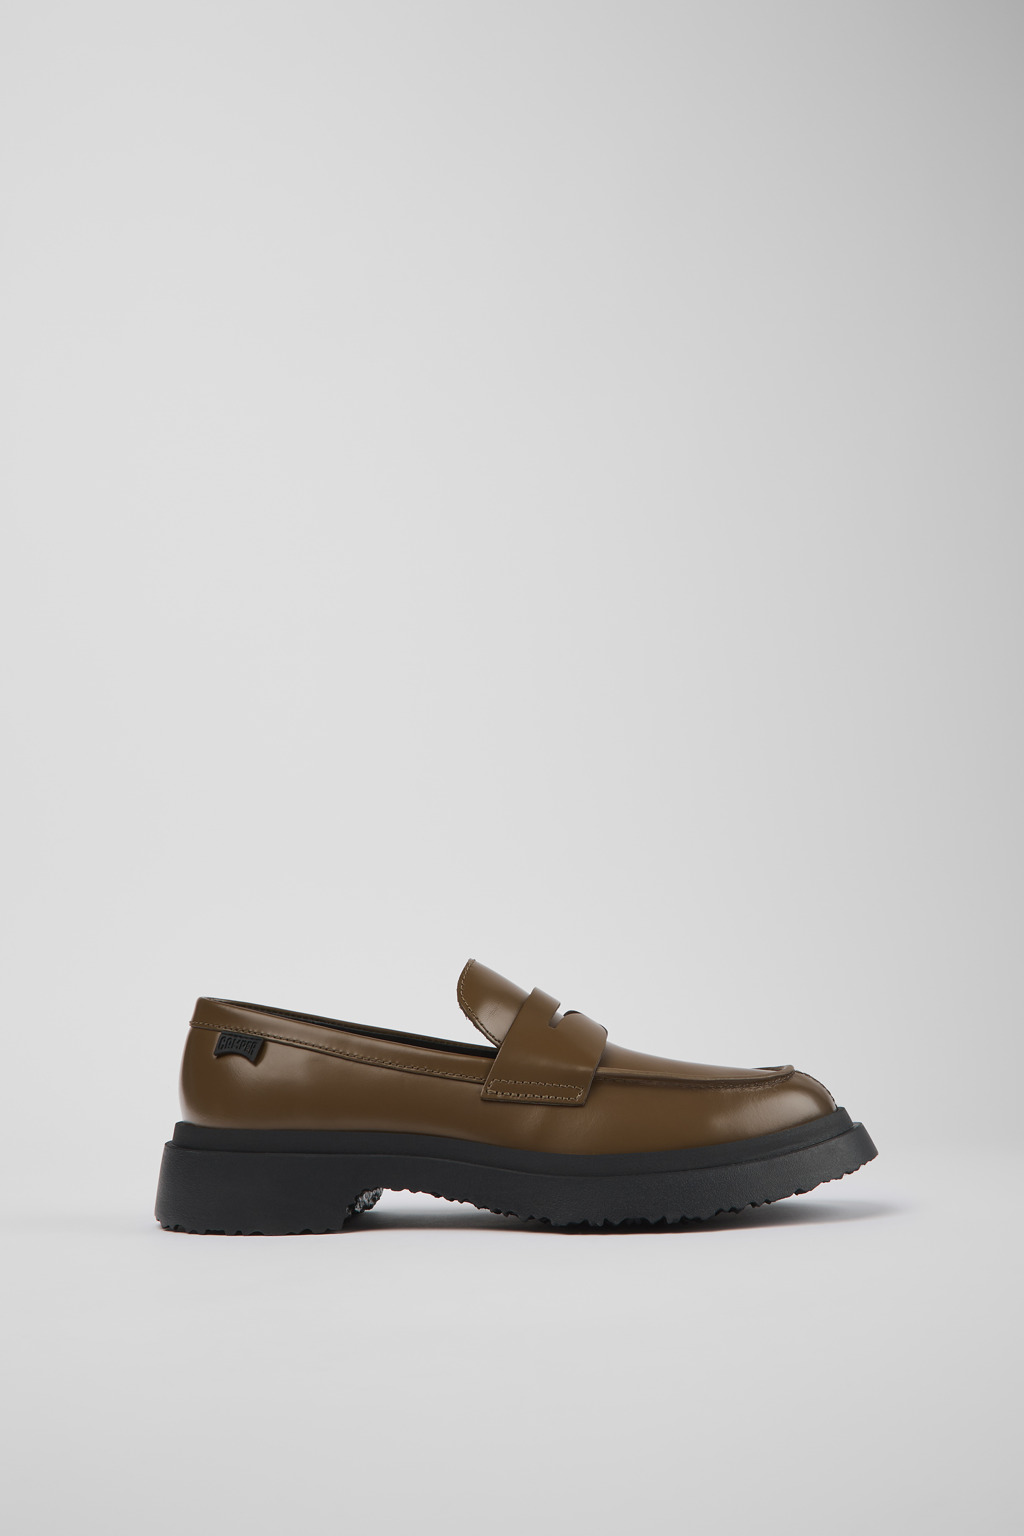 Walden Brown Loafers for Women - Camper Shoes